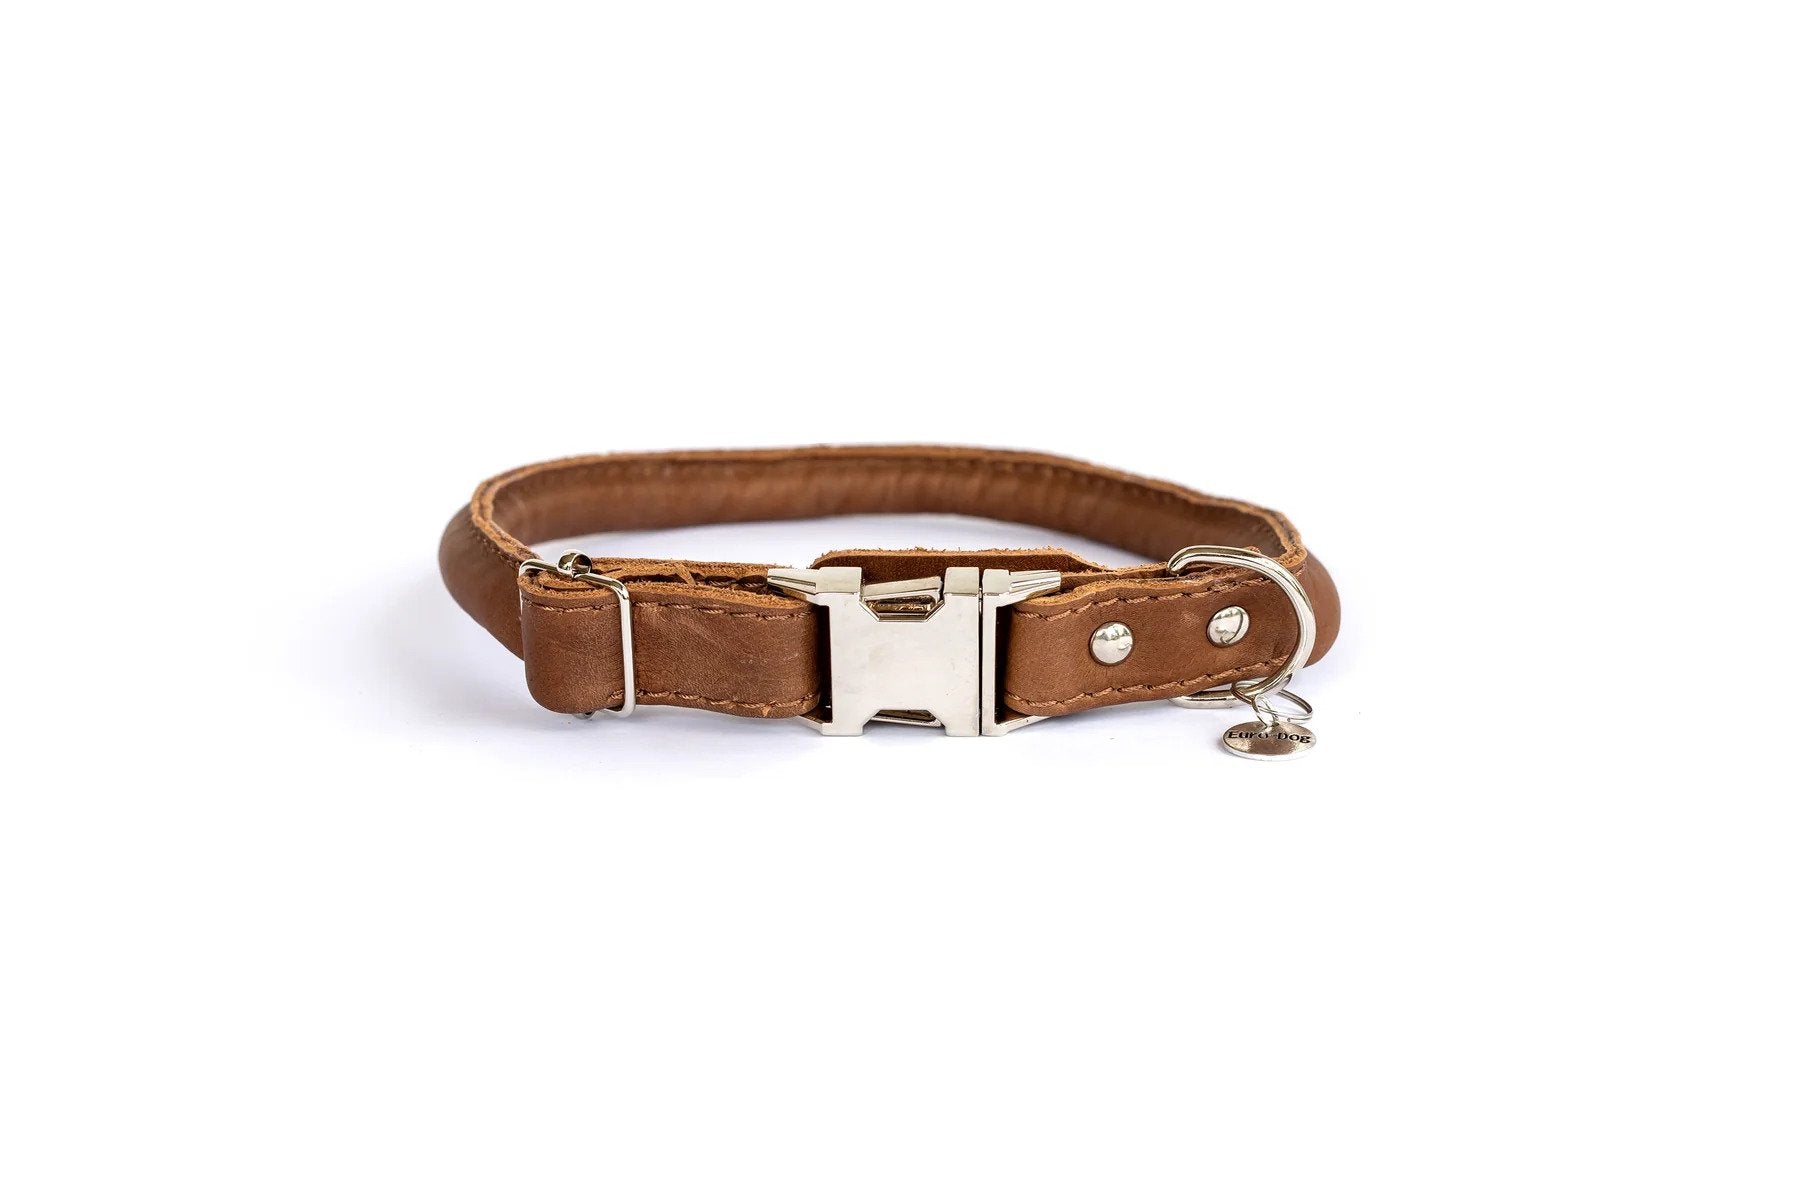 Eurodog Collars Soft Rolled Leather Quick Release Buckle Dog Collar Very Soft Brown Leather